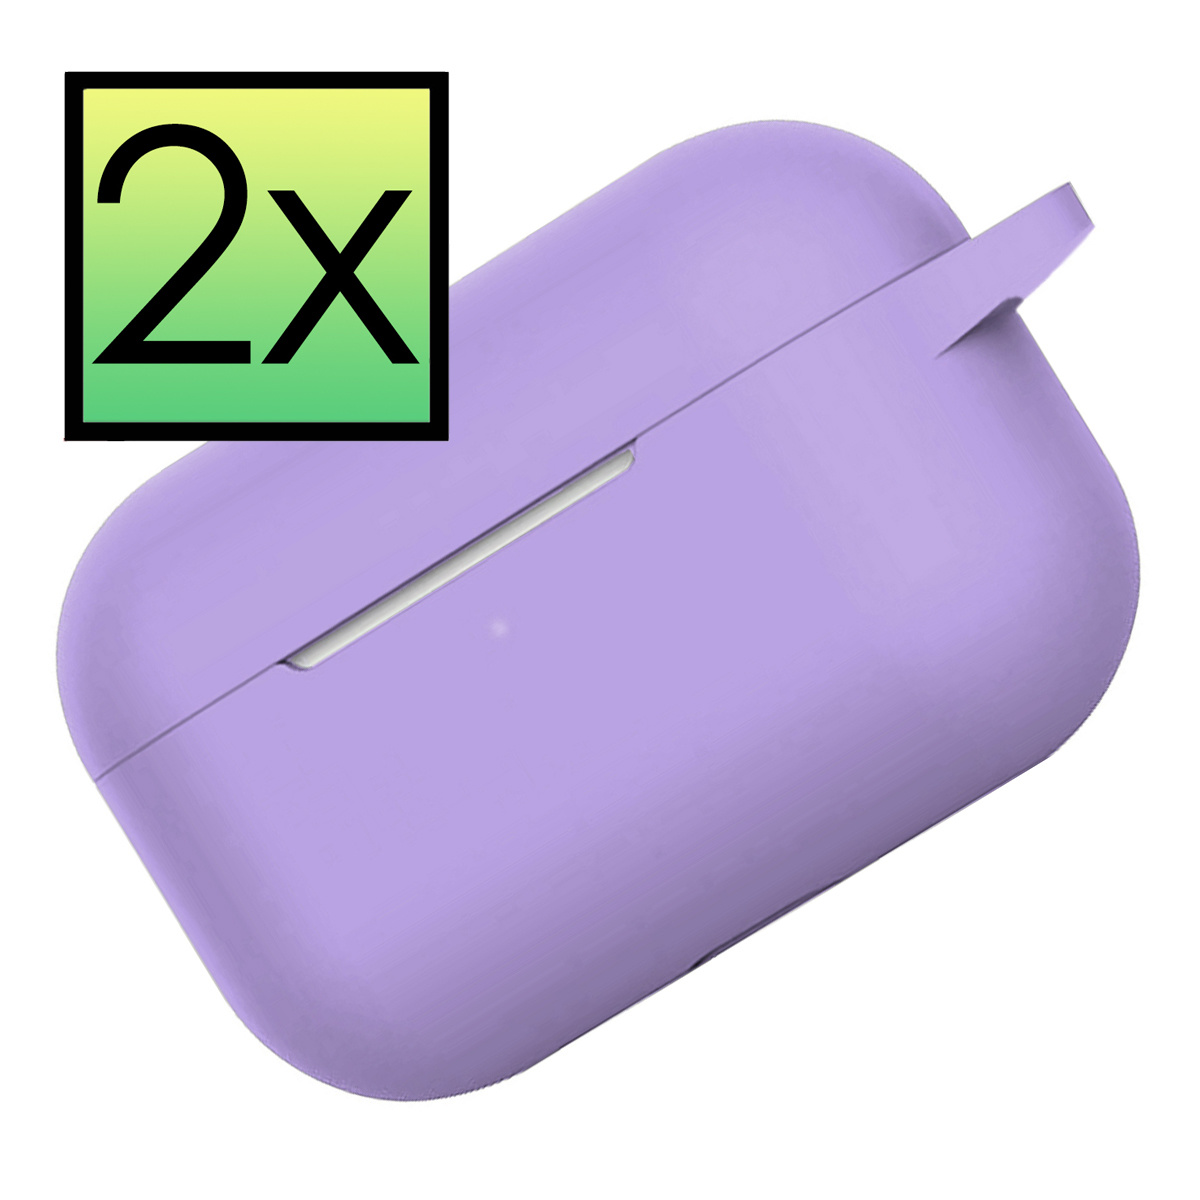 NoXx Hoes Geschikt voor Airpods Pro Hoesje Cover Silicone Case Hoes - Lila - 2x